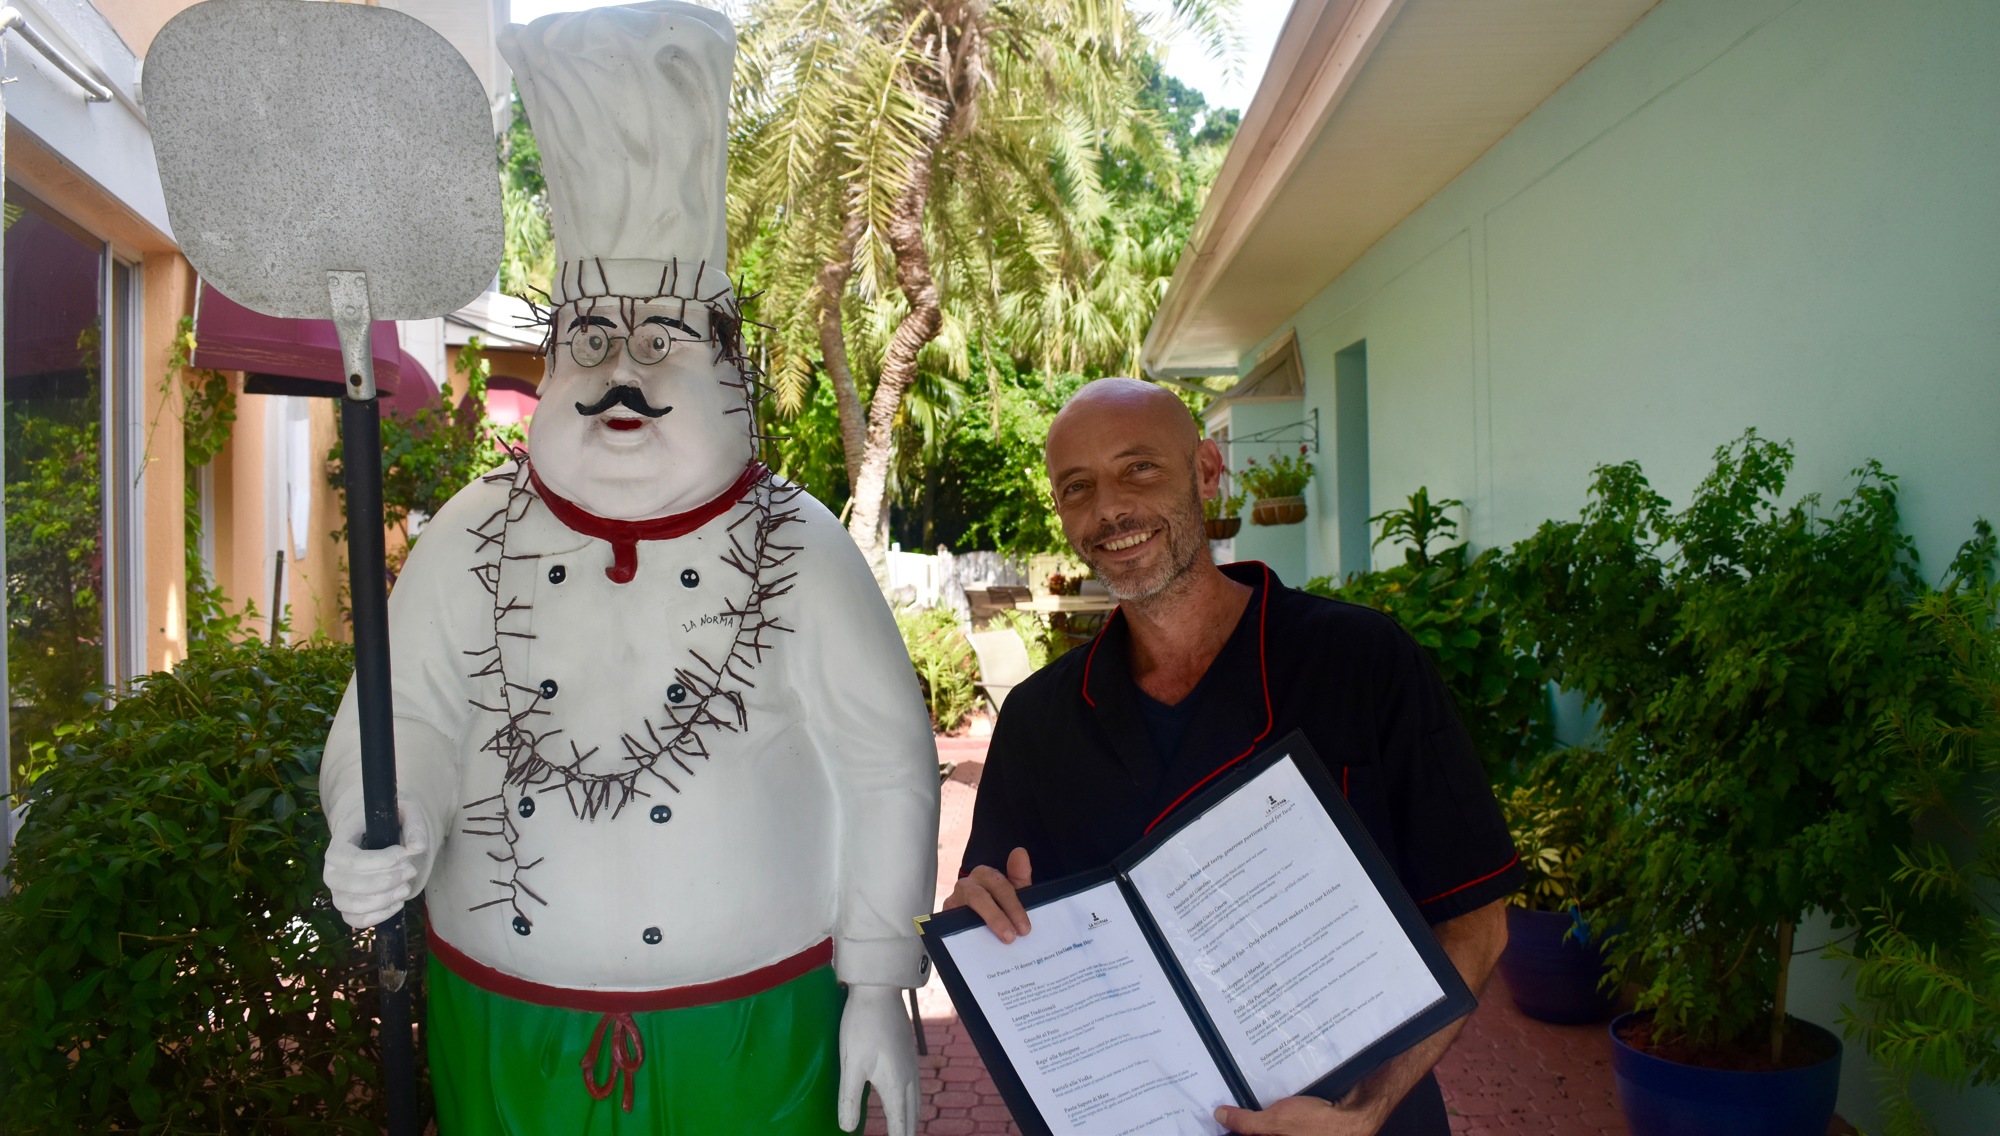 Gianfranco Santagati poses in front of La Norma with the restaurant menu and its mascot.